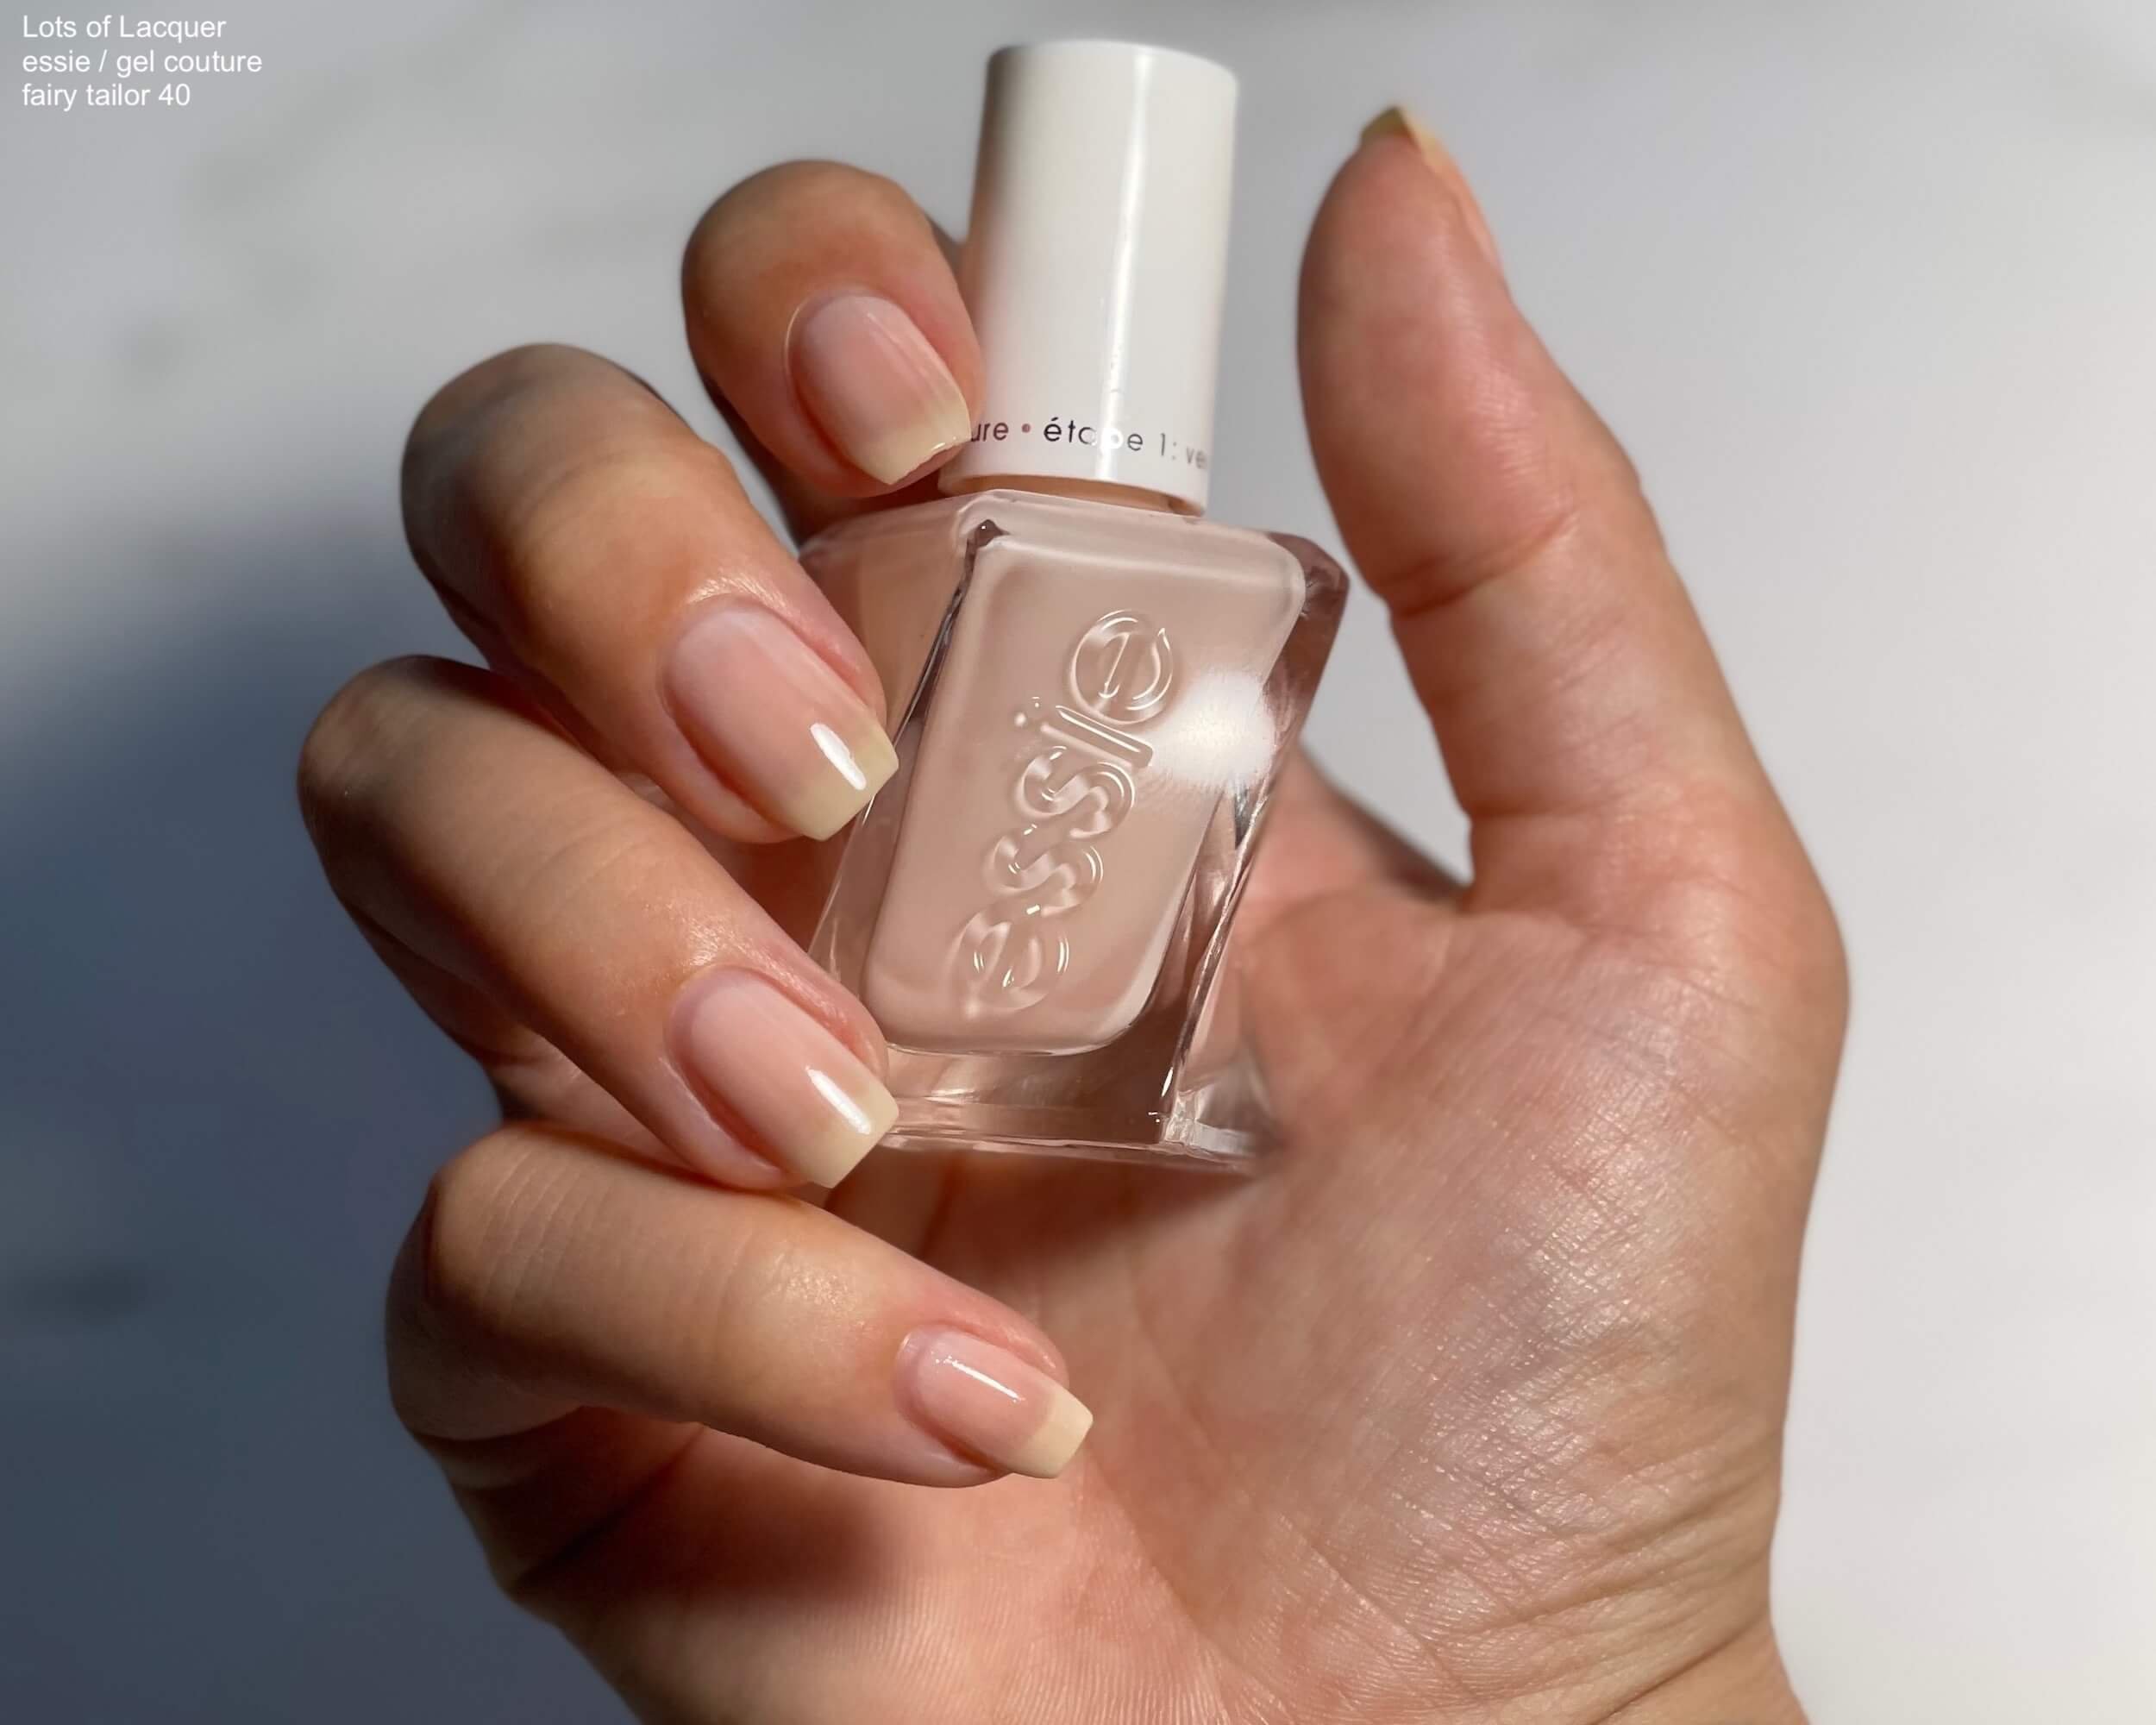 3. "Essie Gel Couture in Fairy Tailor" - wide 4